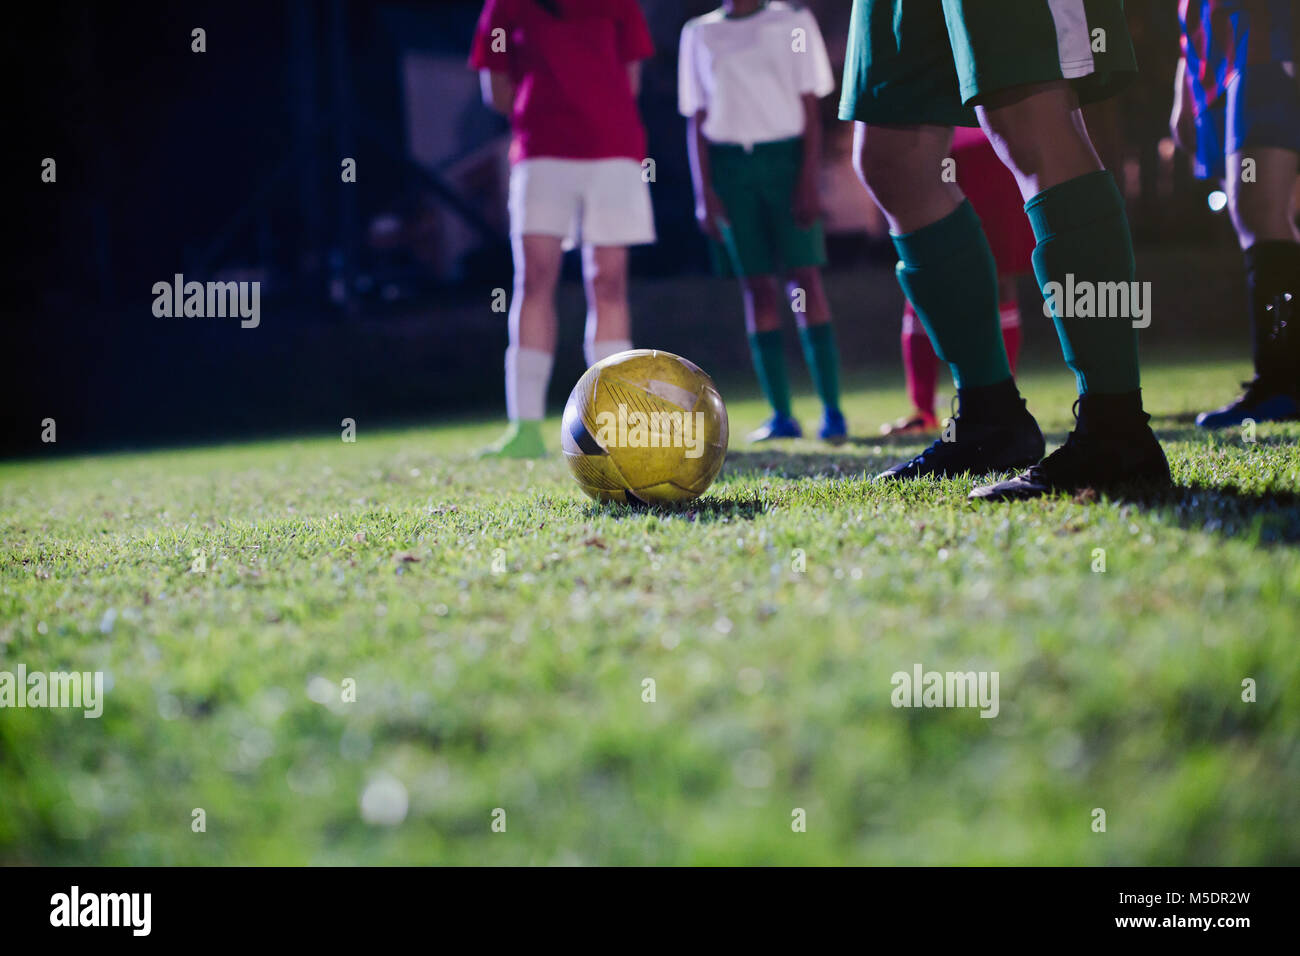 Young female soccer players practicing on field at night Stock Photo